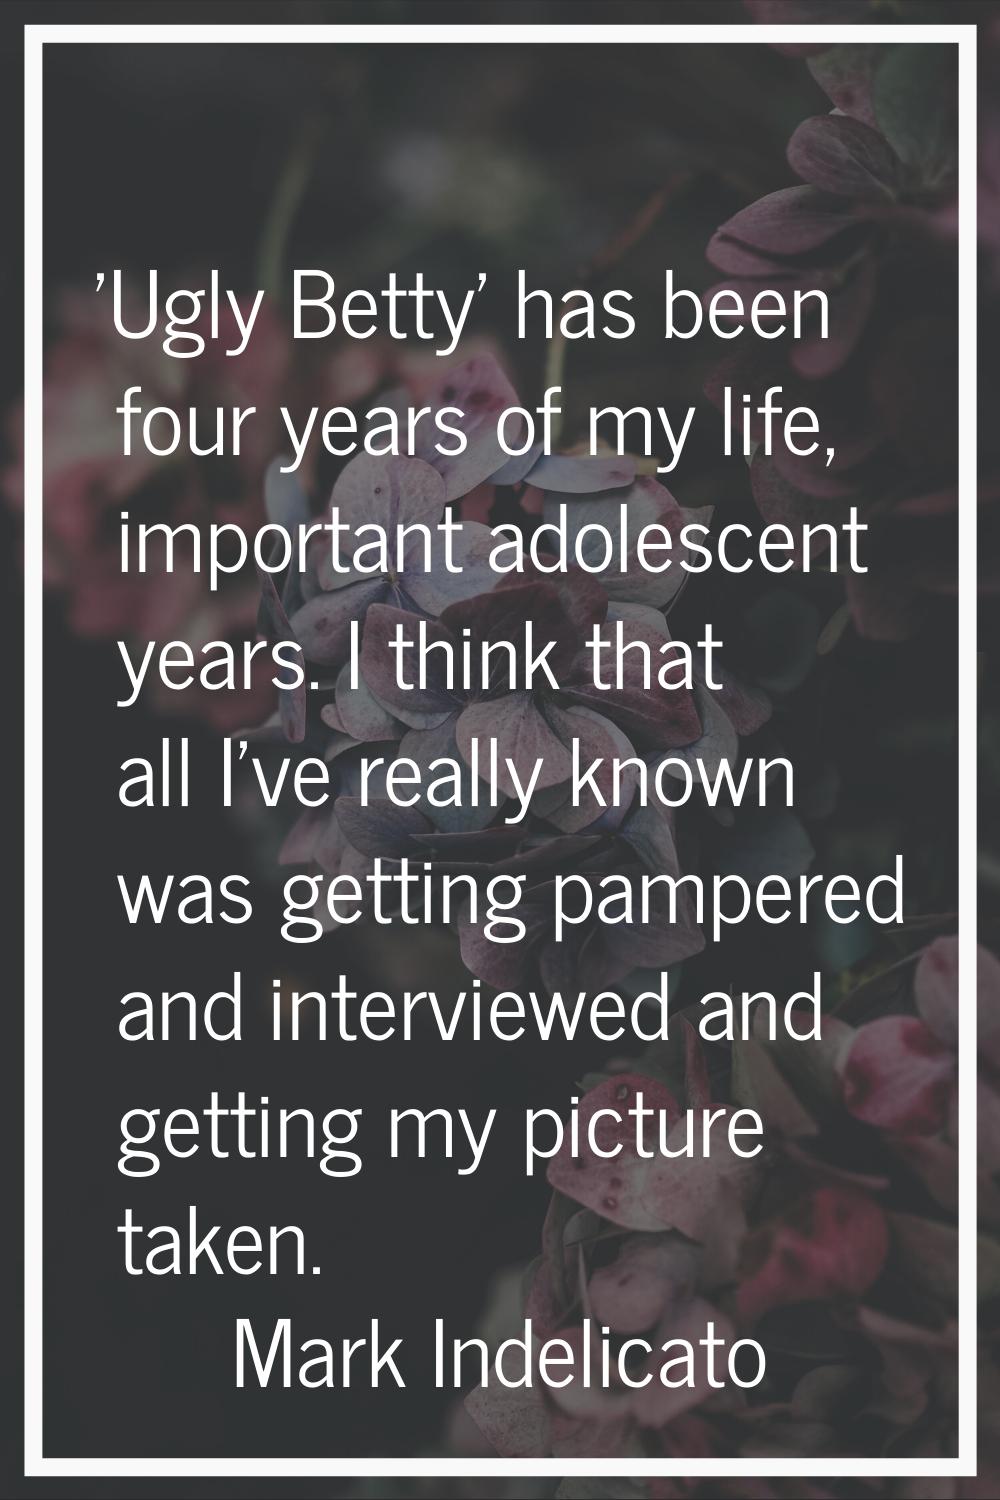 'Ugly Betty' has been four years of my life, important adolescent years. I think that all I've real